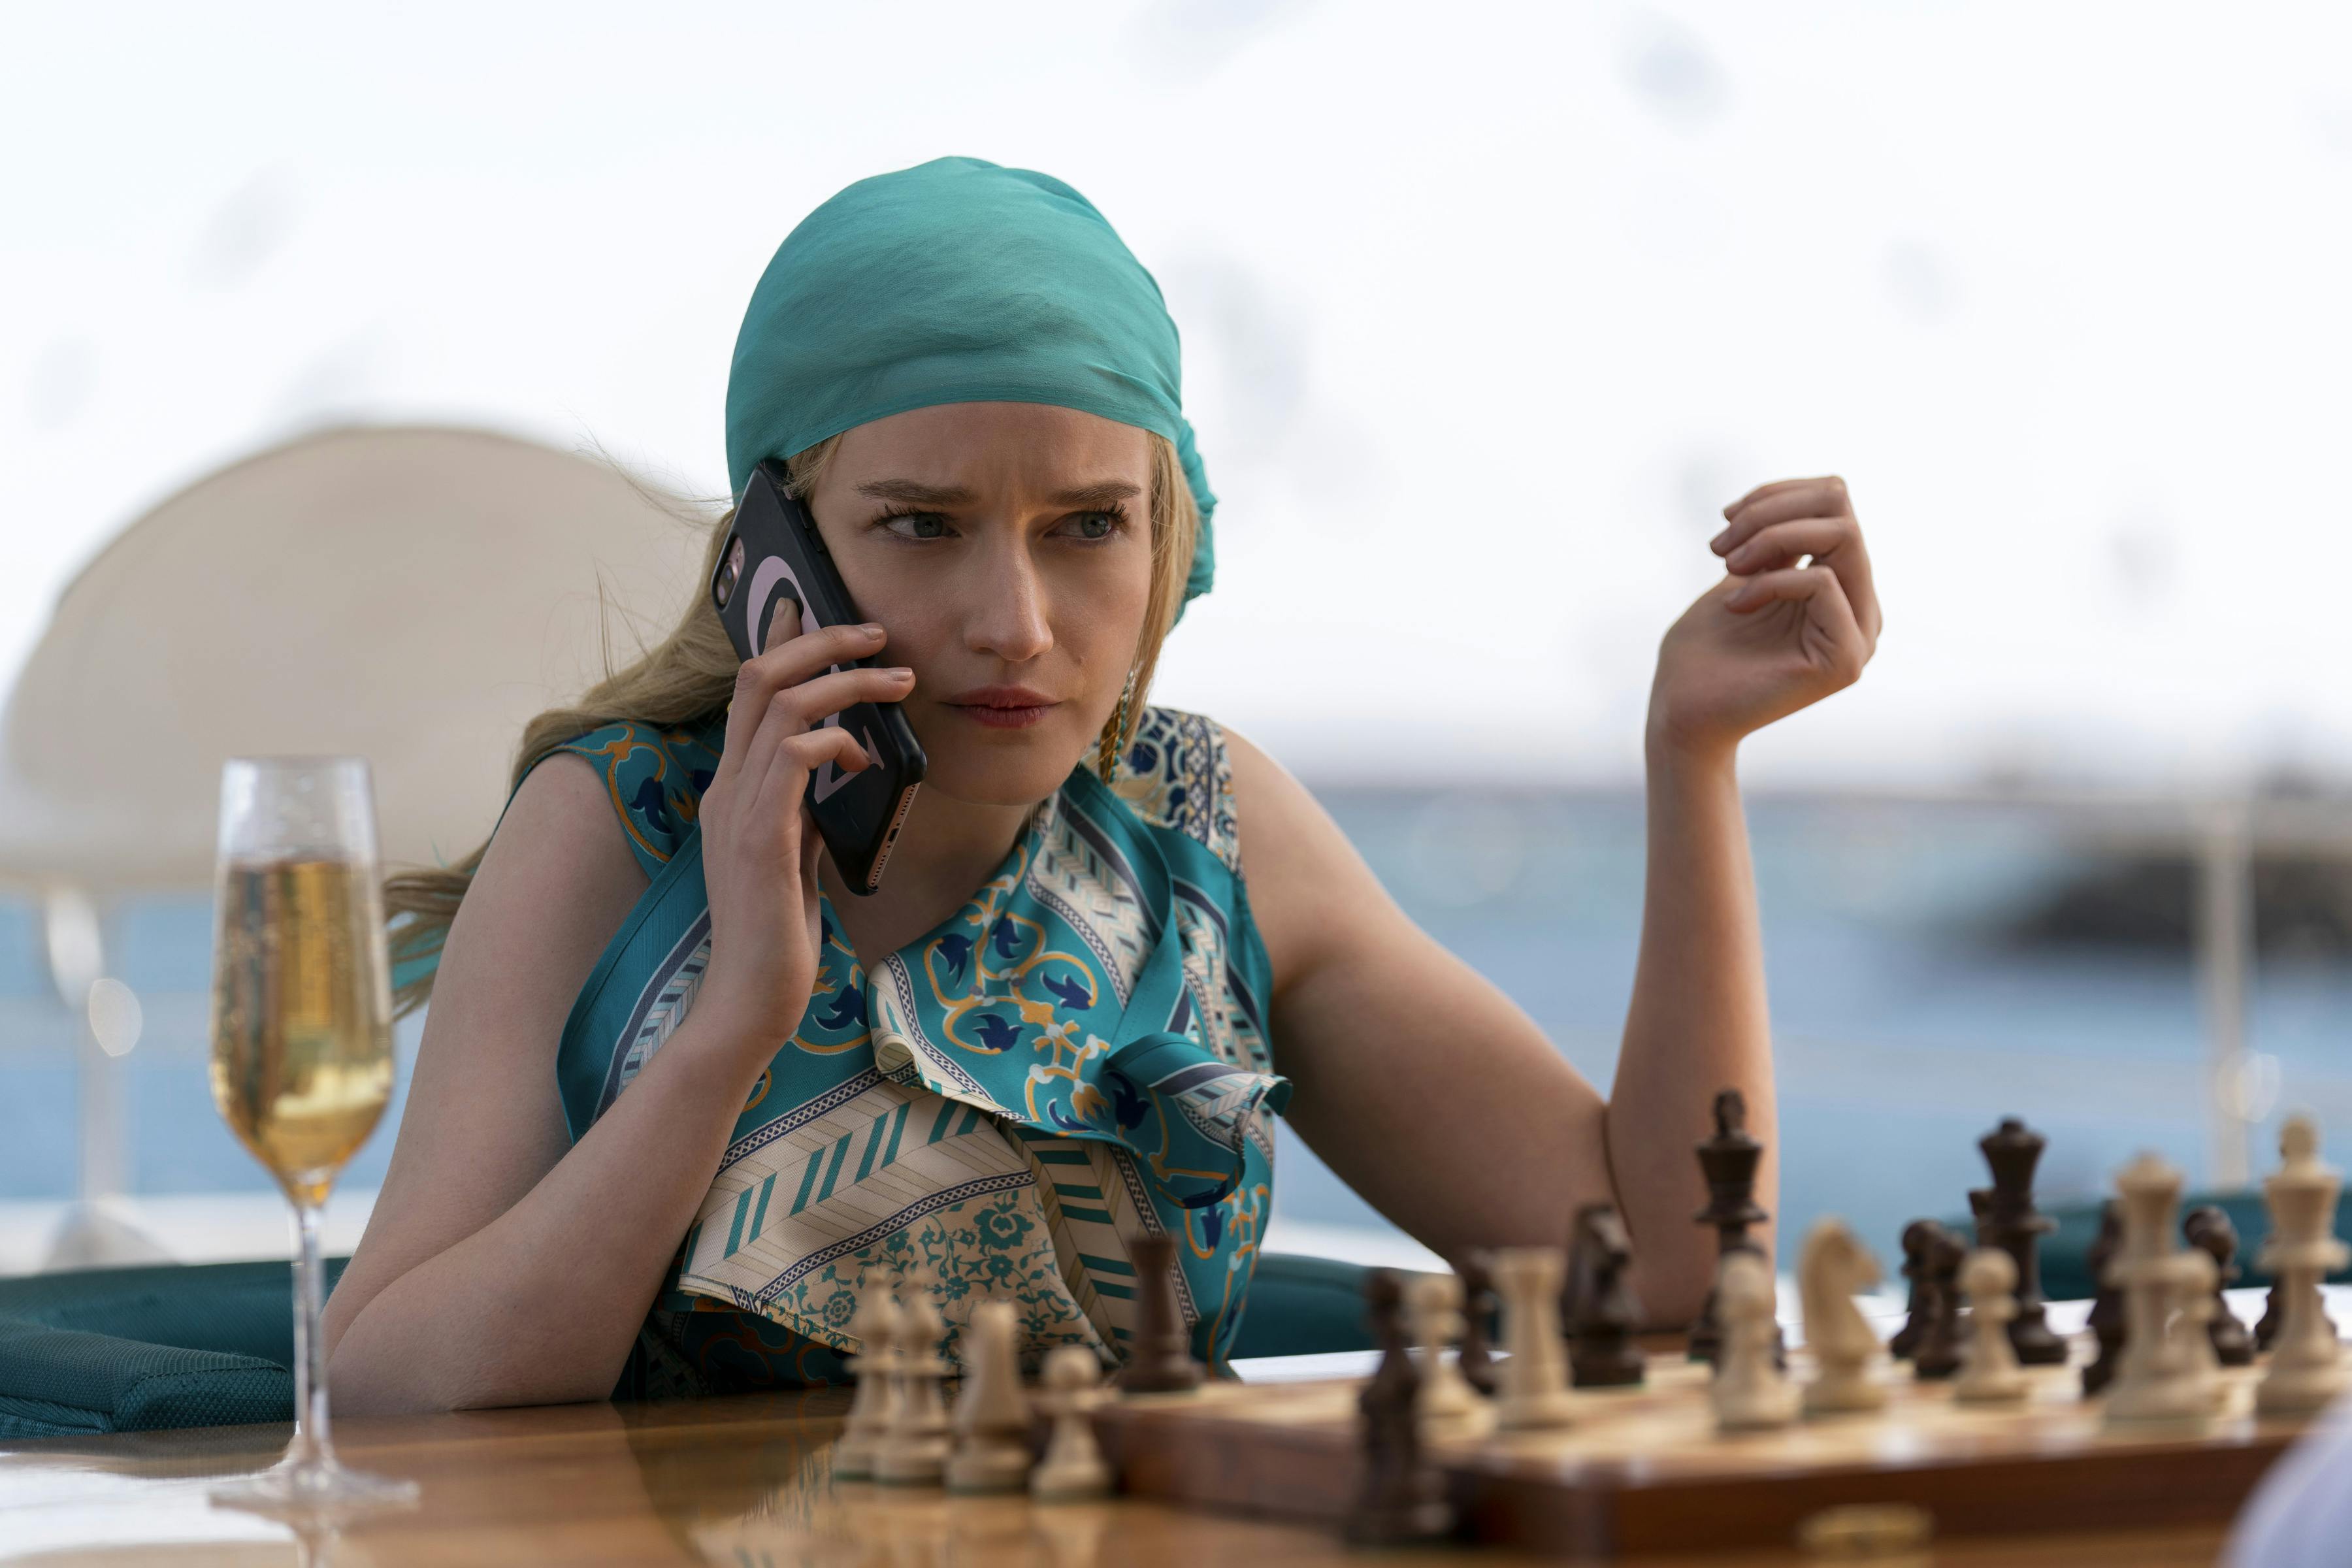 Anna Delvey, played by Julia Garner, wears a turquoise headscarf and patterned shirt. In front of her sits a chess board and a glass of champagne.